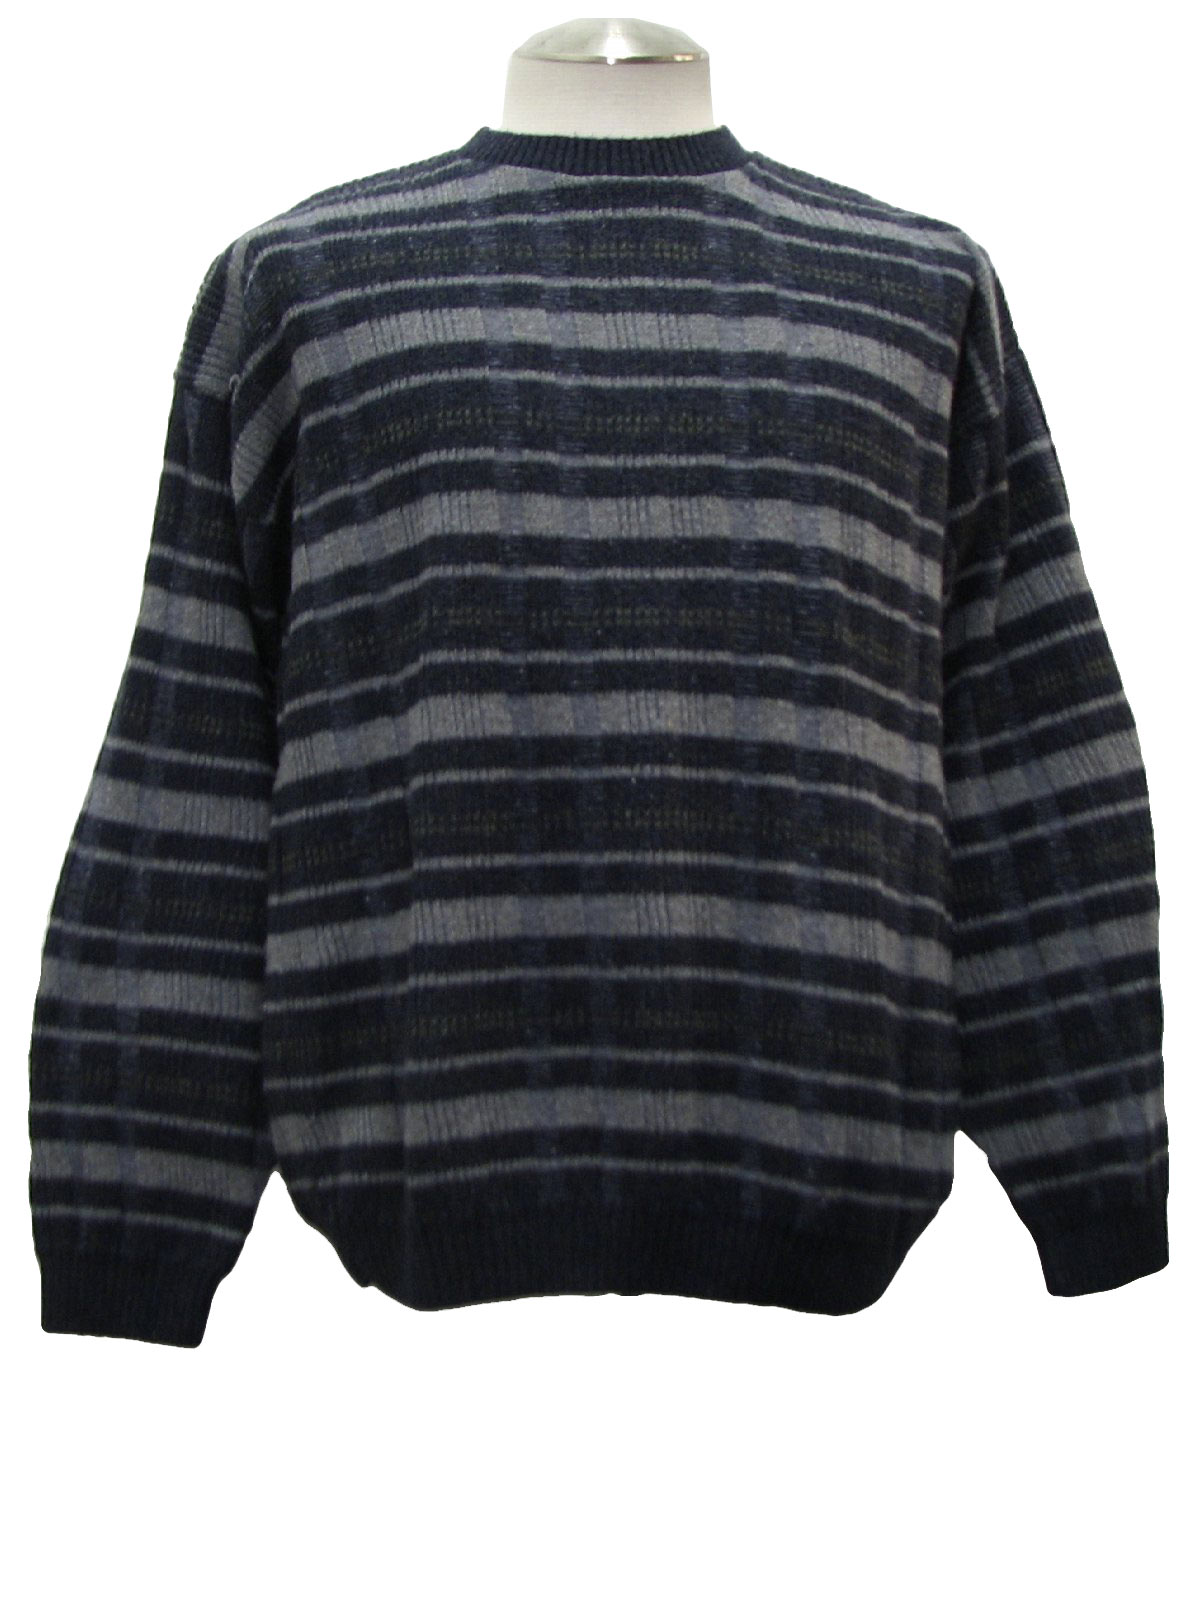 1990s Vintage Sweater: 90s -Liberty Sweaters- Mens grey, blue, and ...